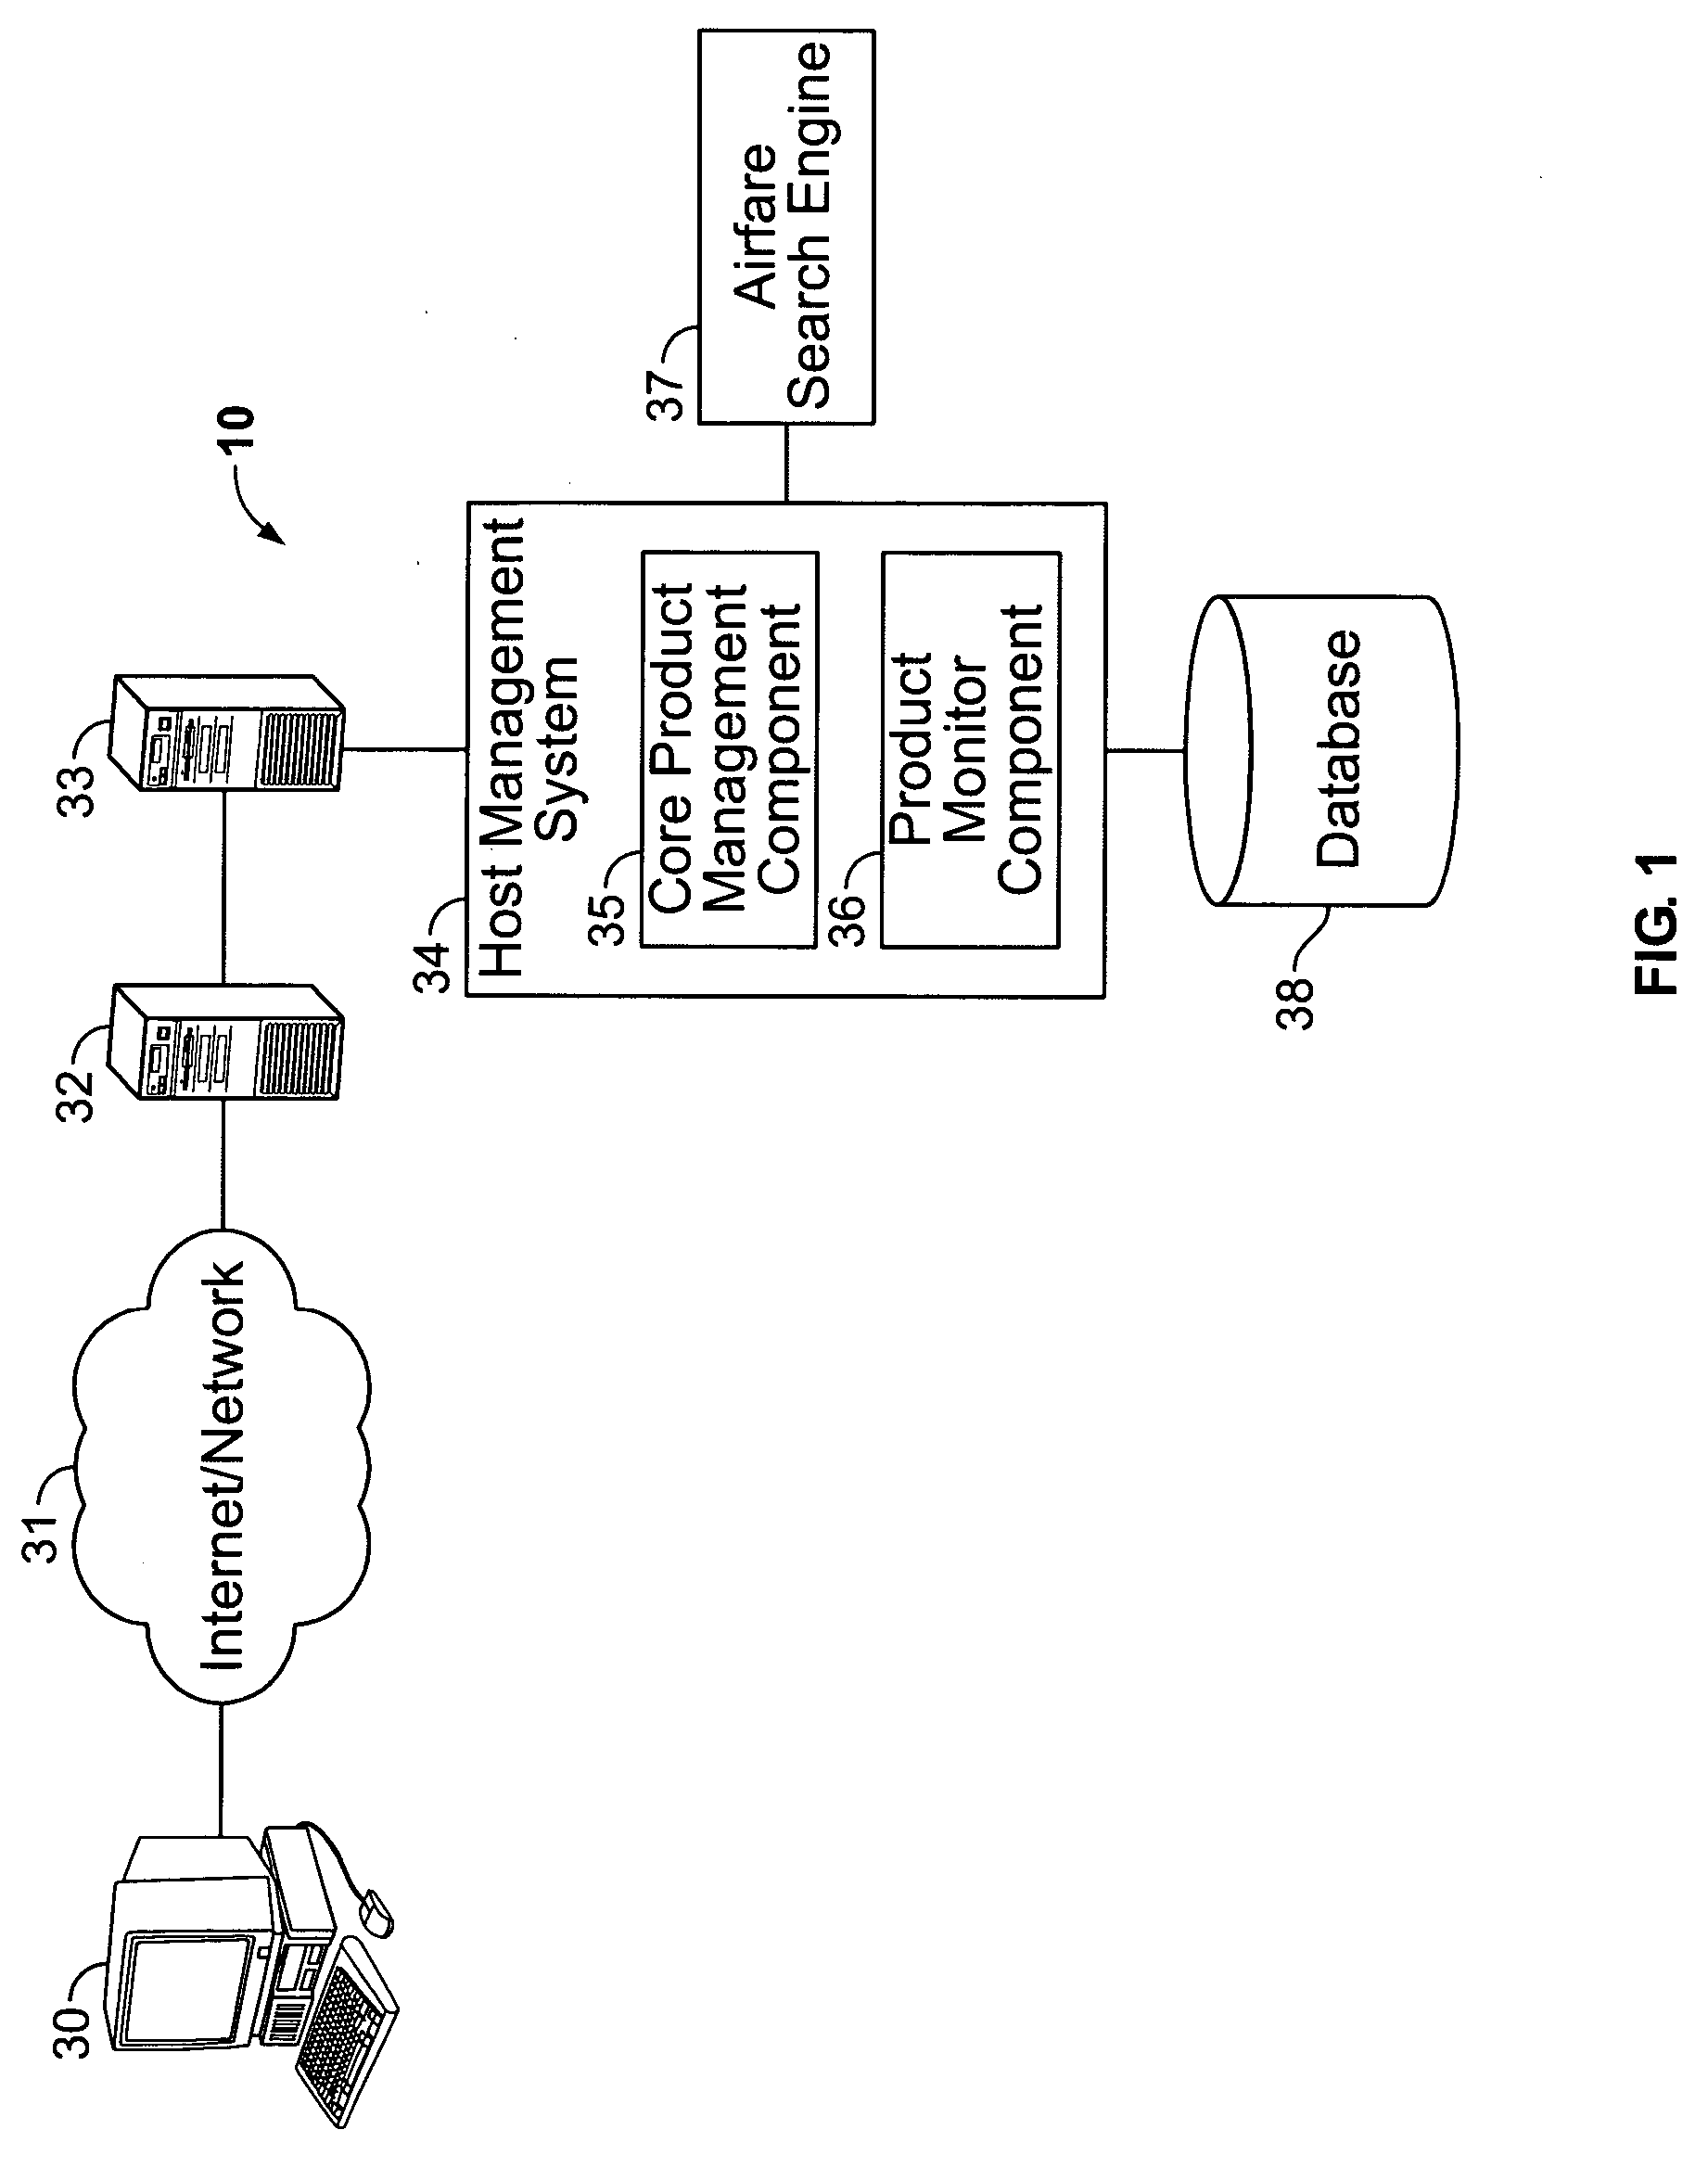 Product availability tracking and notification system and method